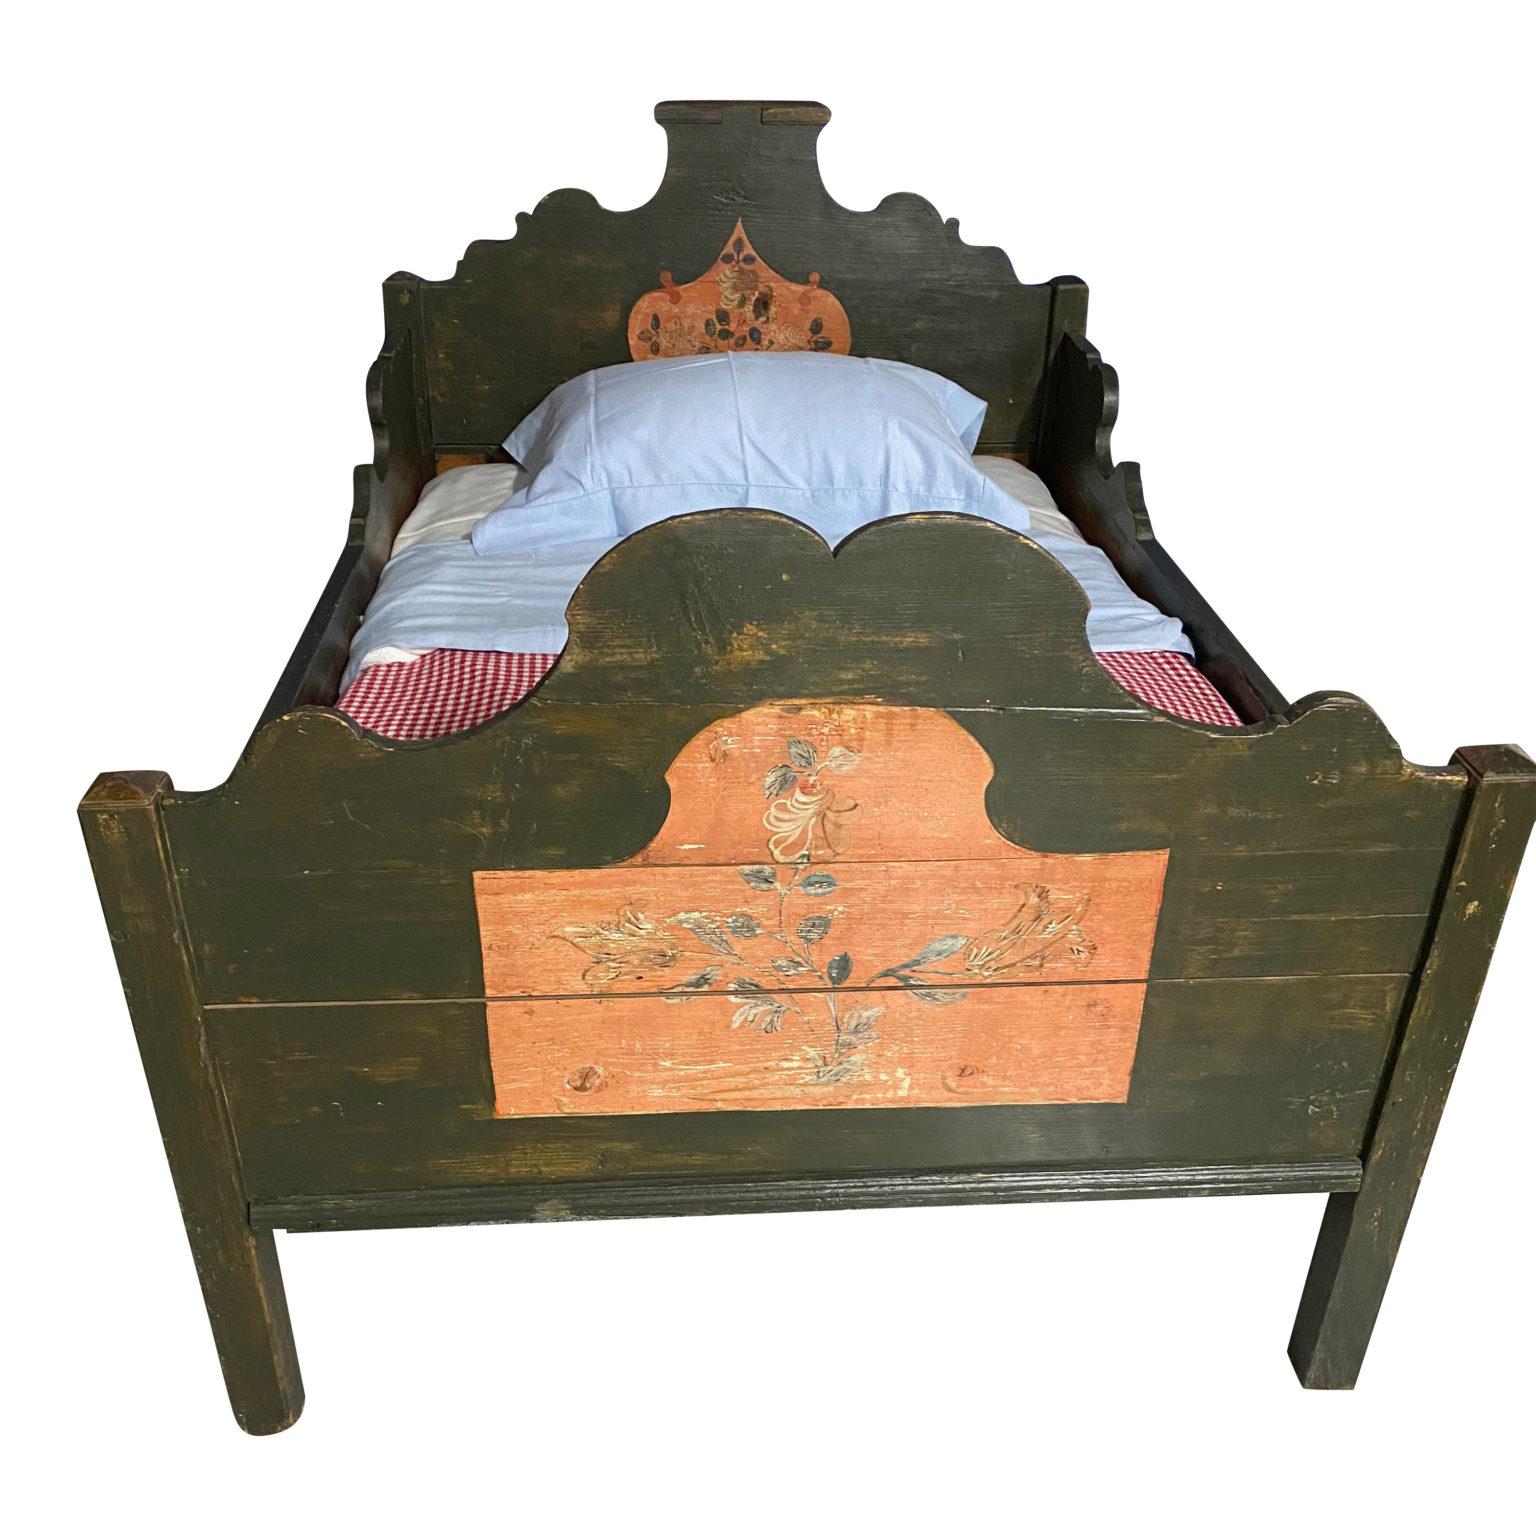 Single bed hand painted in olive green with pink floral motifs on the head and footboards

70 depth x 46.5 W

(23 Height of Side Rail) (43 H of Headboard) (38 Height of Footboard).